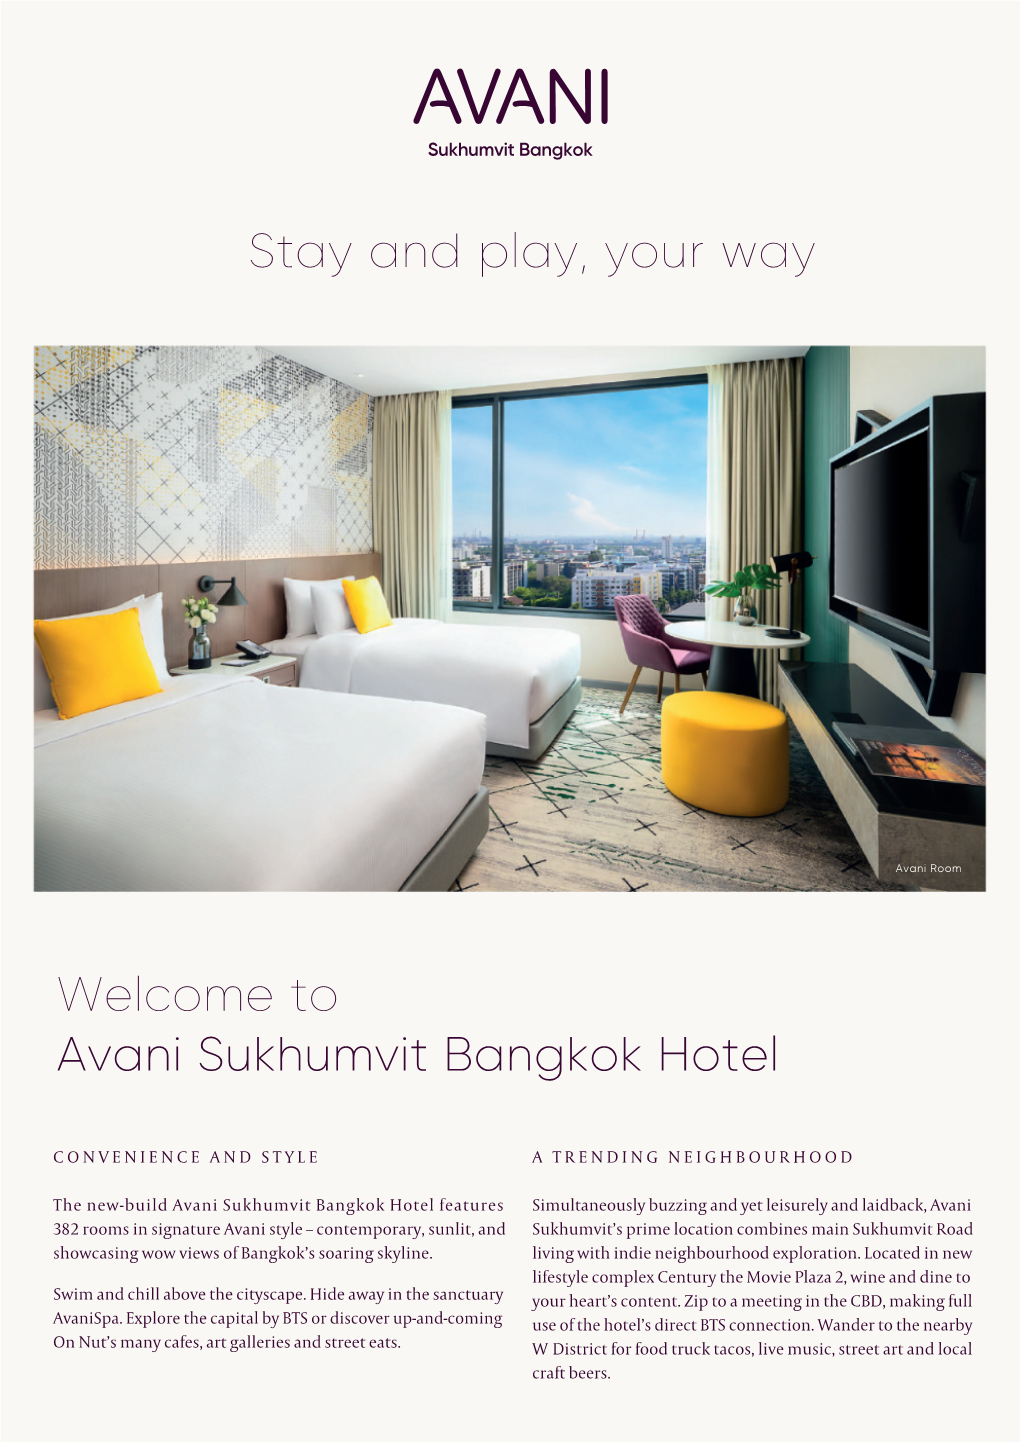 Stay and Play, Your Way Welcome to Avani Sukhumvit Bangkok Hotel